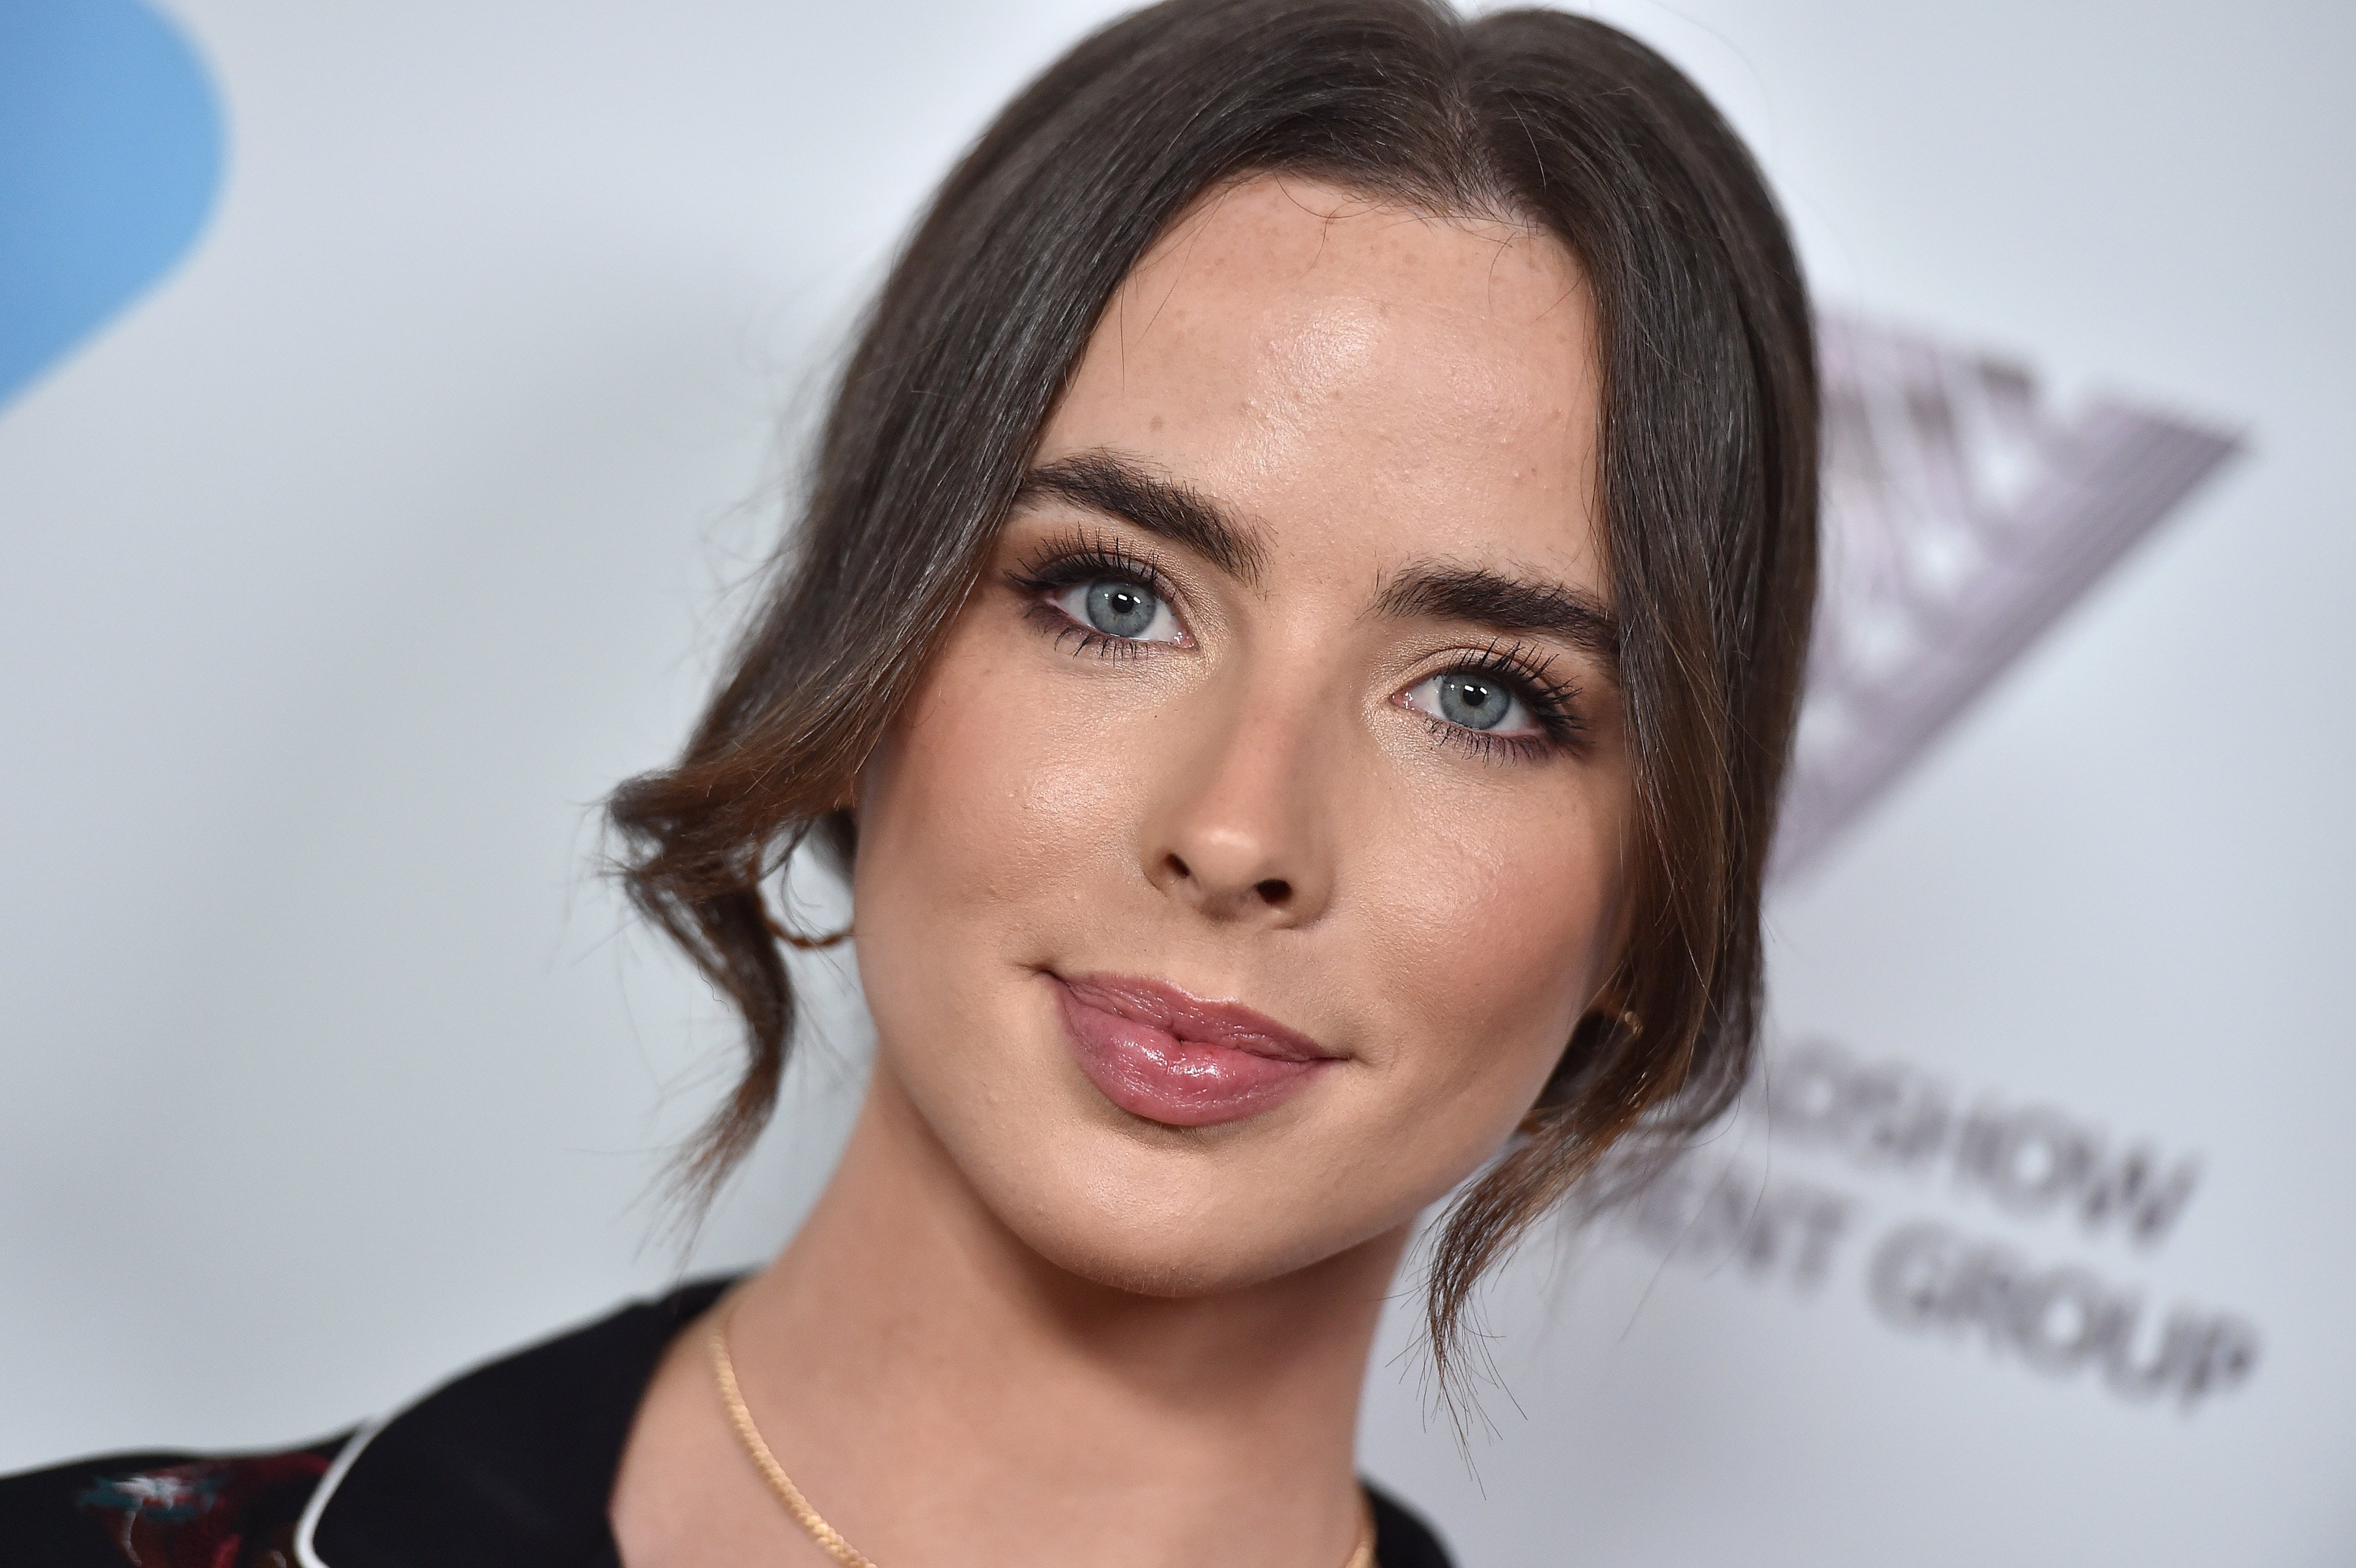 'The Bold and the Beautiful' star Ashleigh Brewer is best known for her role as Ivy Forrester.